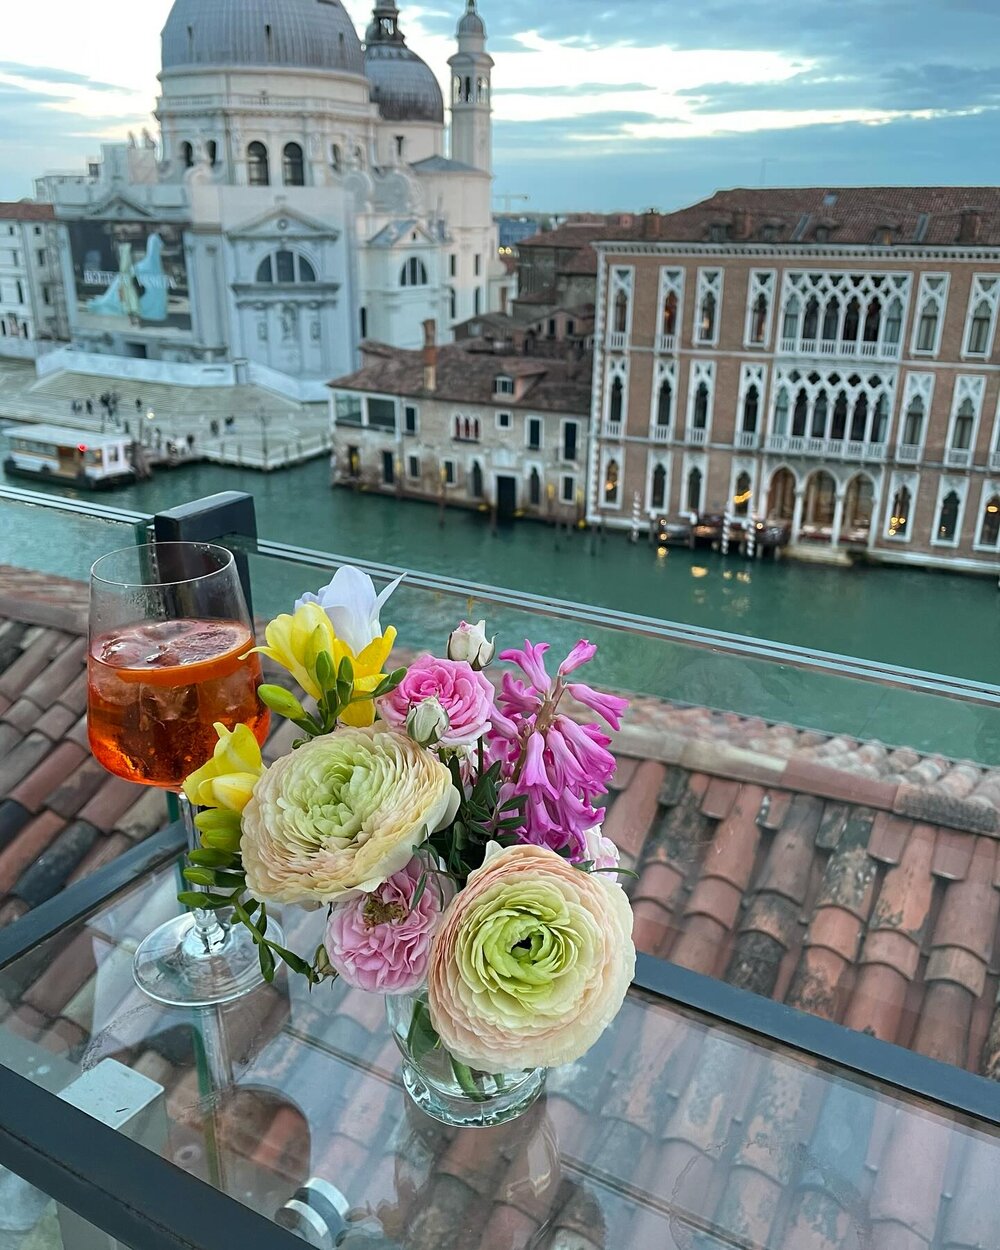 Evenings in Venice. ✨The Travelux 2024 kickoff event at grand Hotel Monaco and an invitational aperitif at The Gritti Palace with sensational views. #travelux2024 #venice #luxurytravel #traveladvisor #italytravel #thegrittipalace